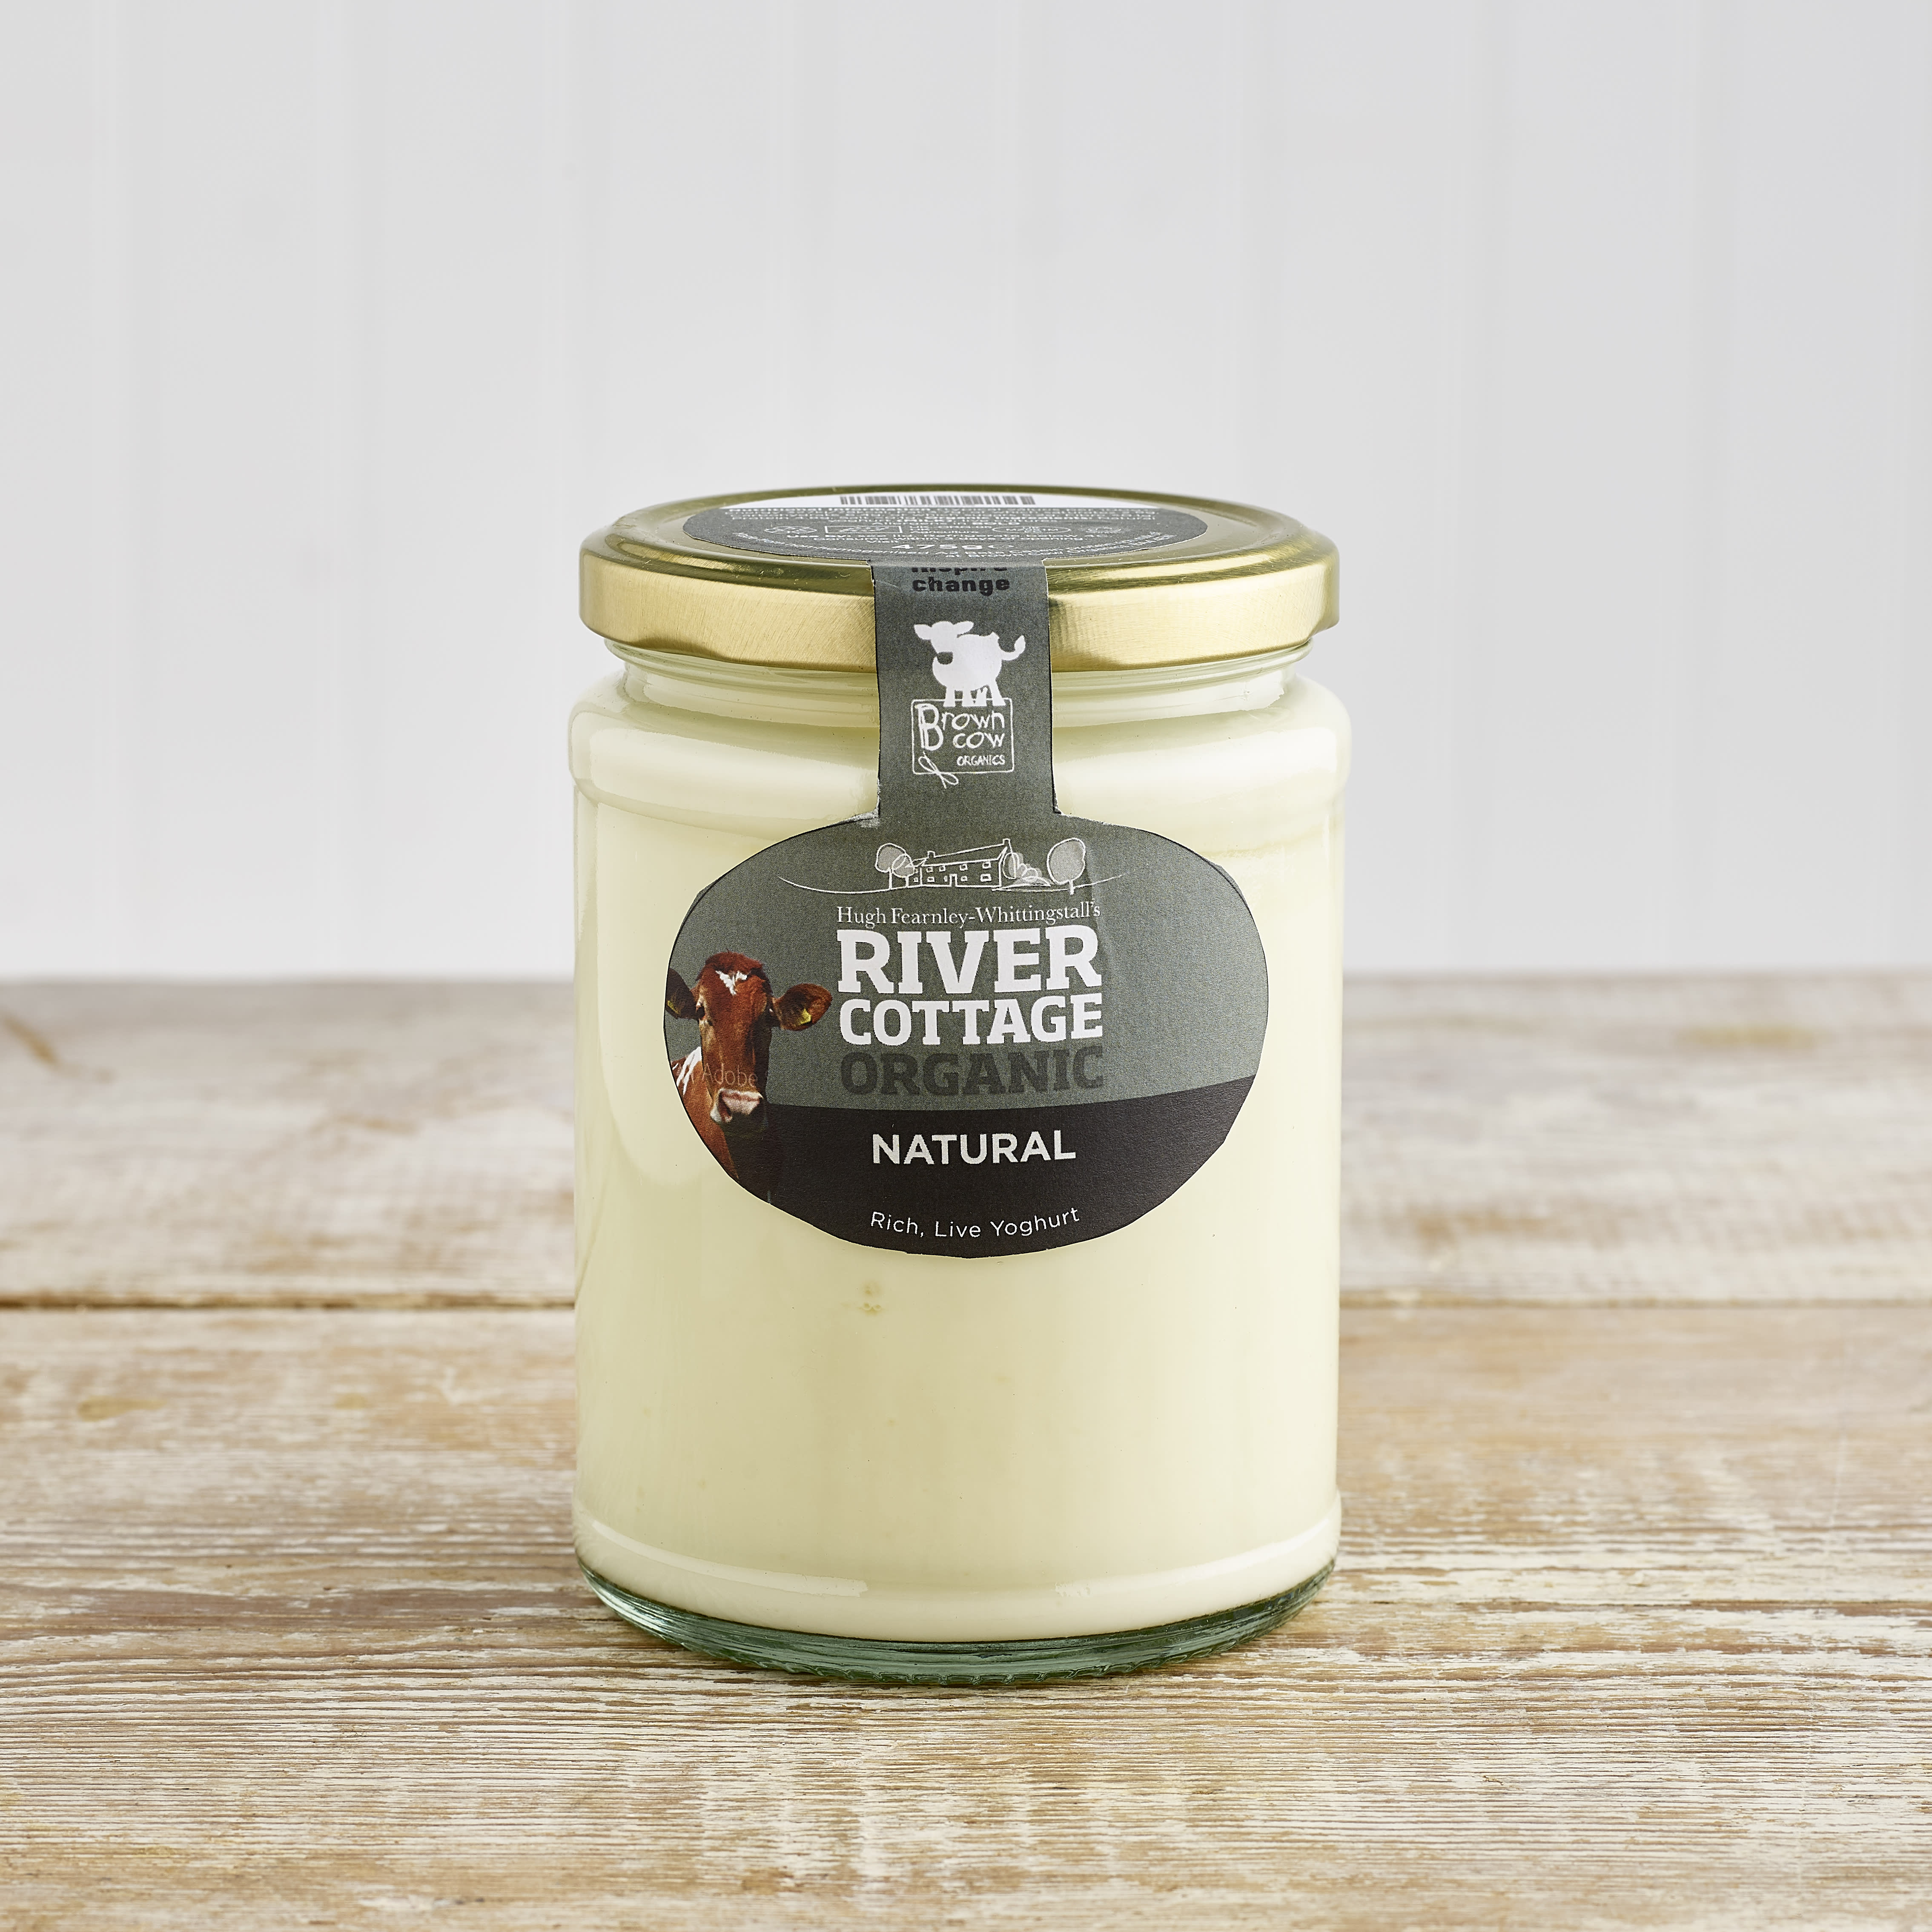 River Cottage Organic Natural Yoghurt in Glass, 475g